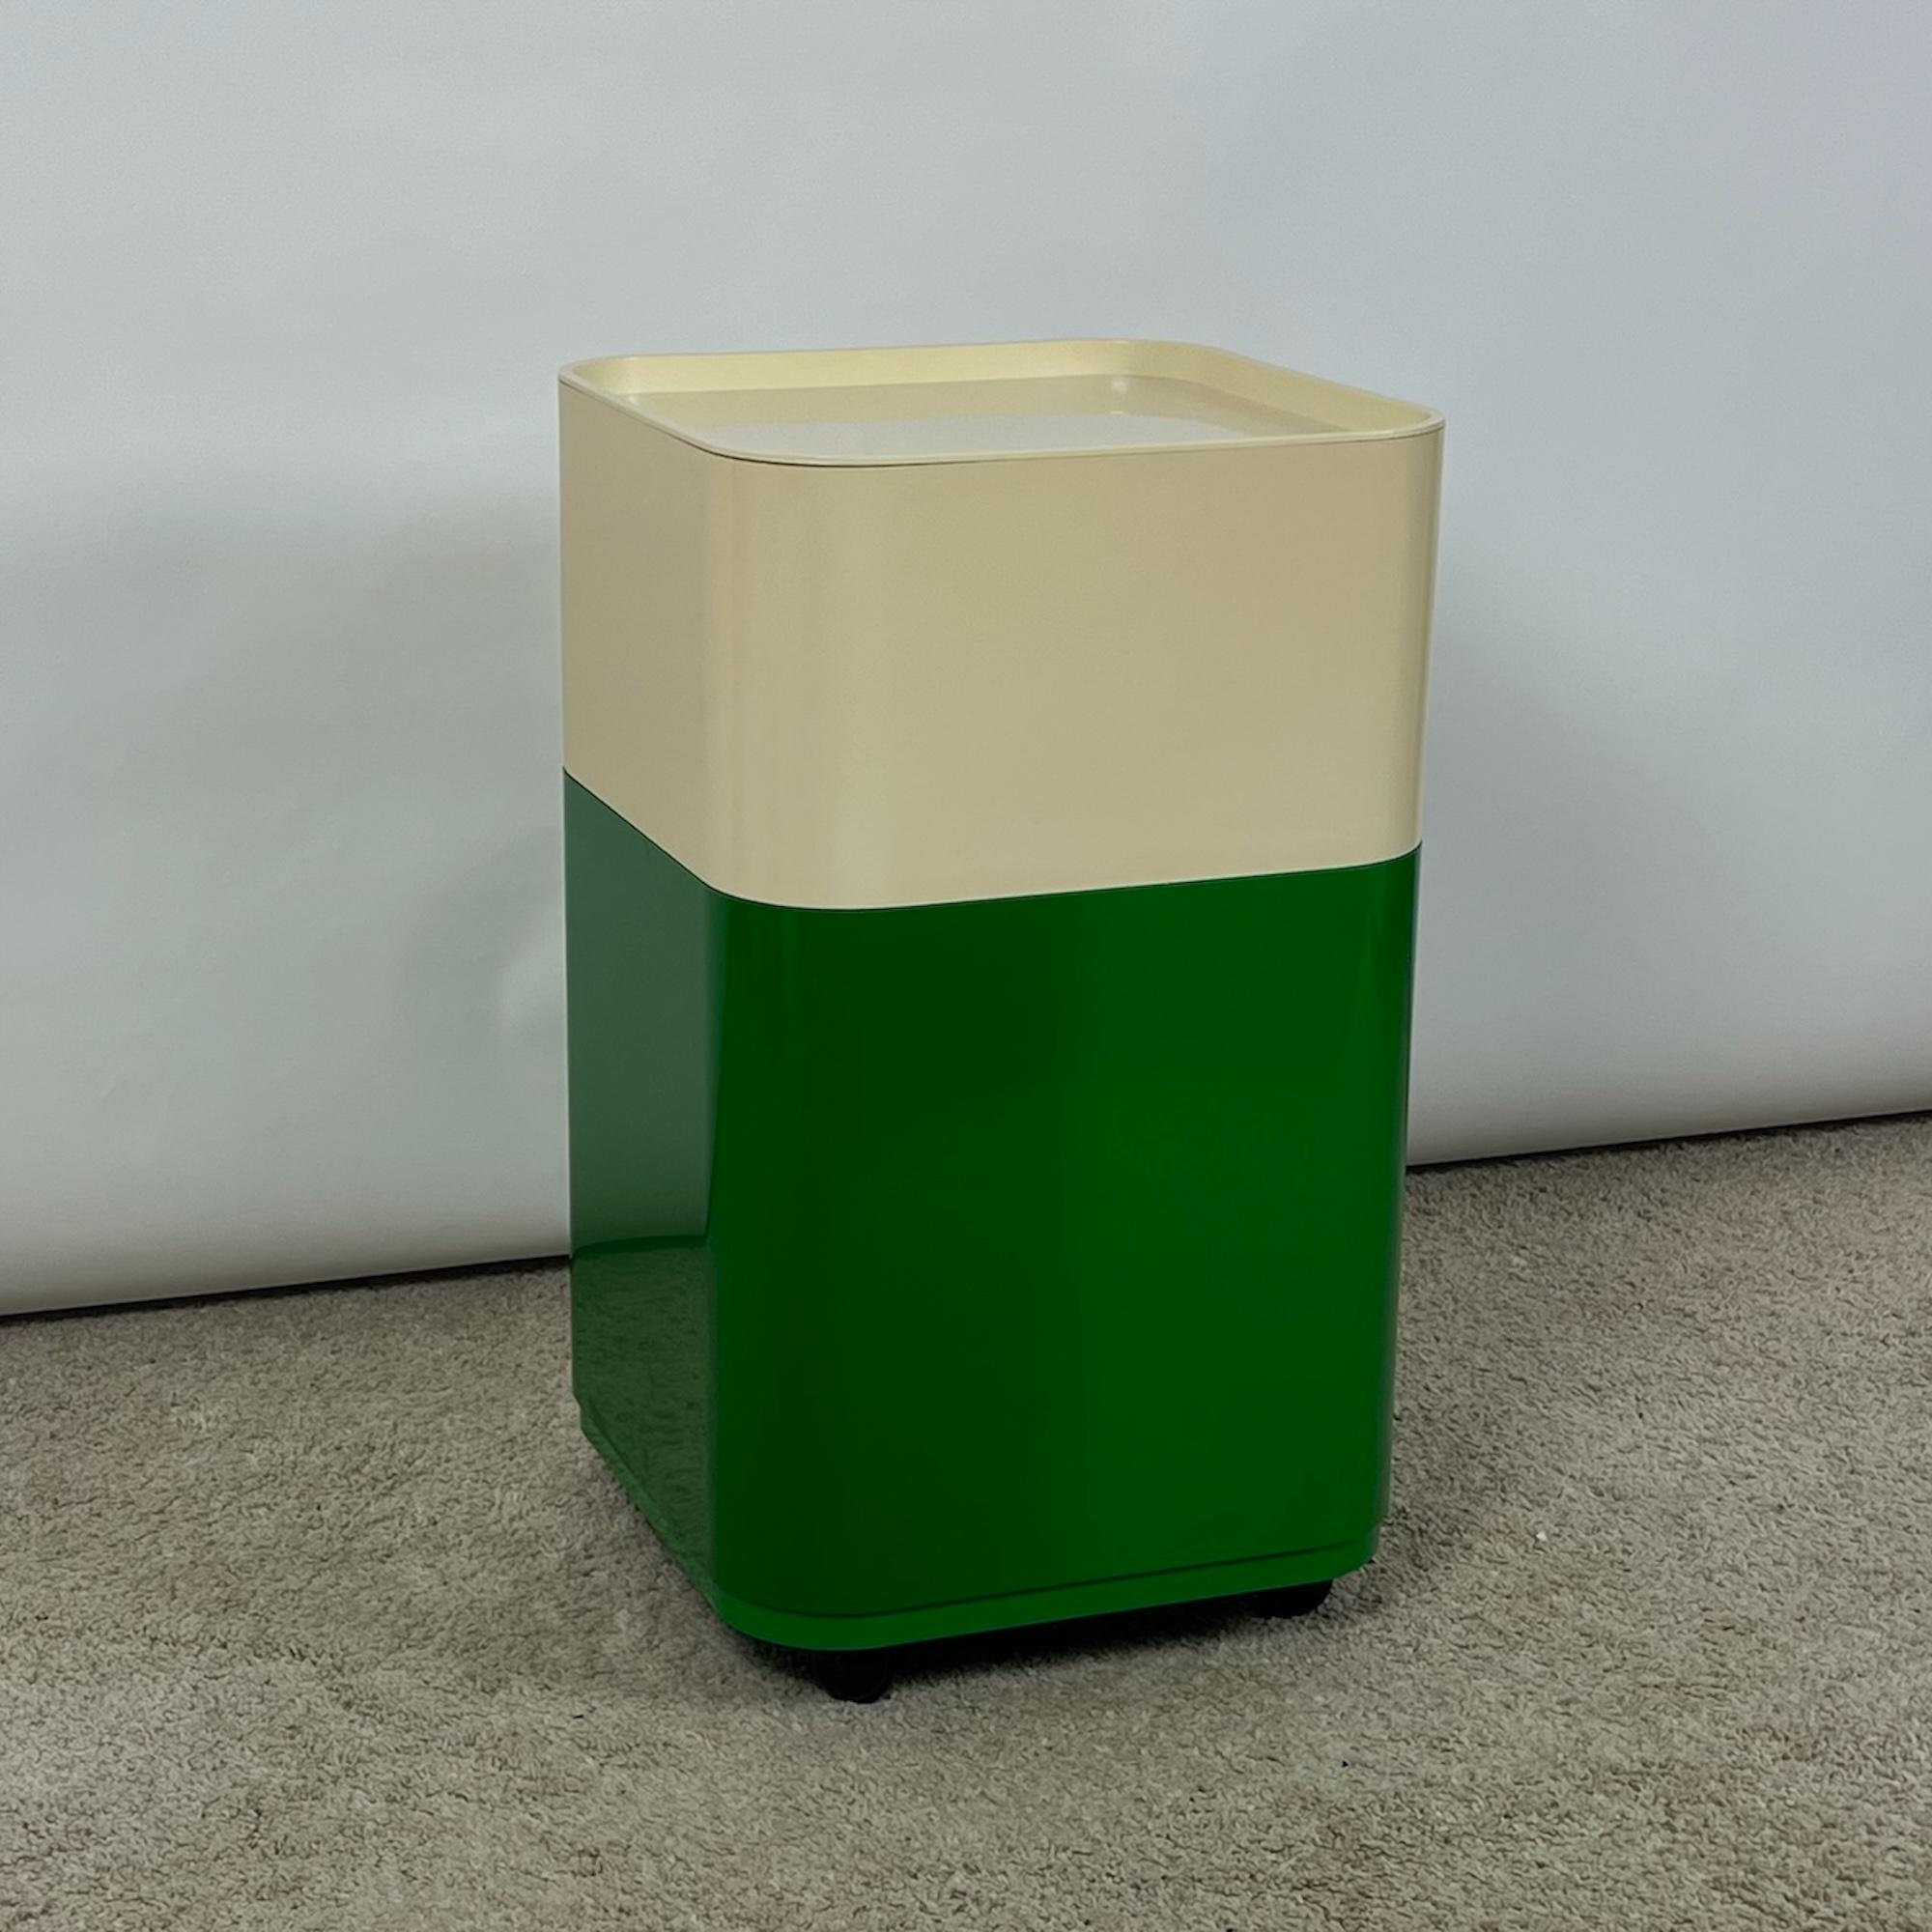 Italian Kartell 'Componibili' Square Based Cabinet Modules in green and white, 1960s For Sale